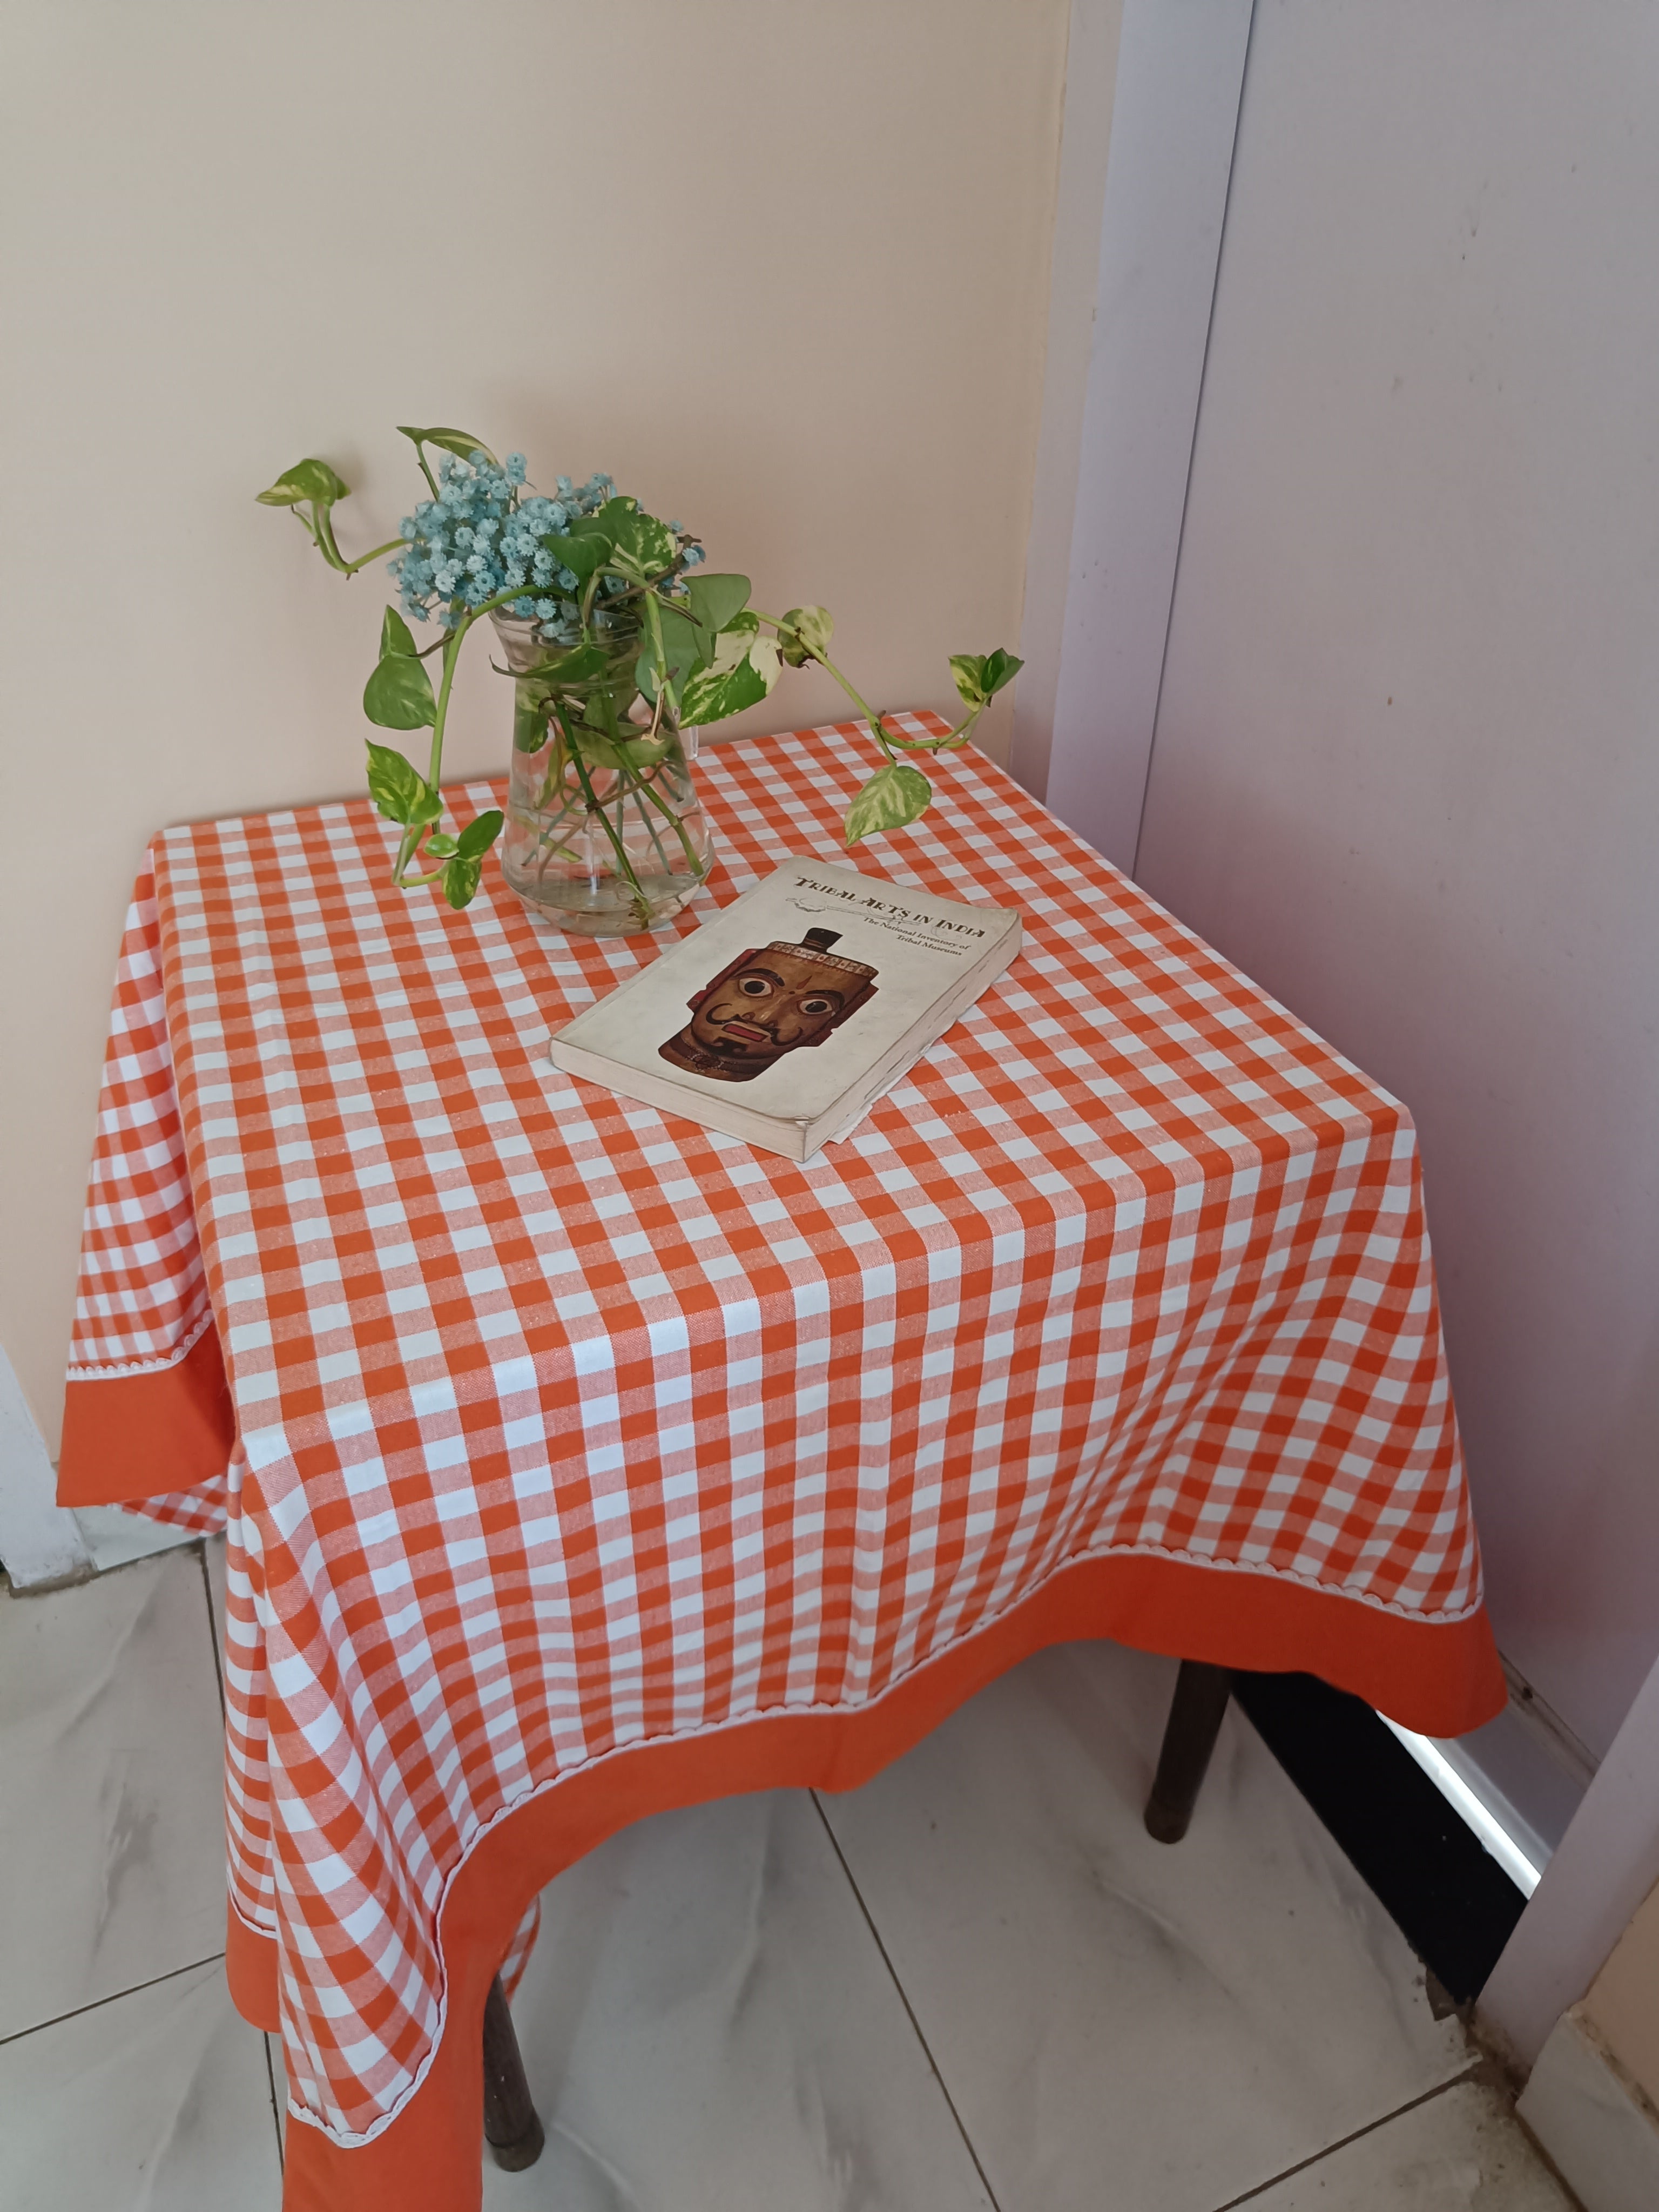 Orange Gingham Print Table Cloth with lace